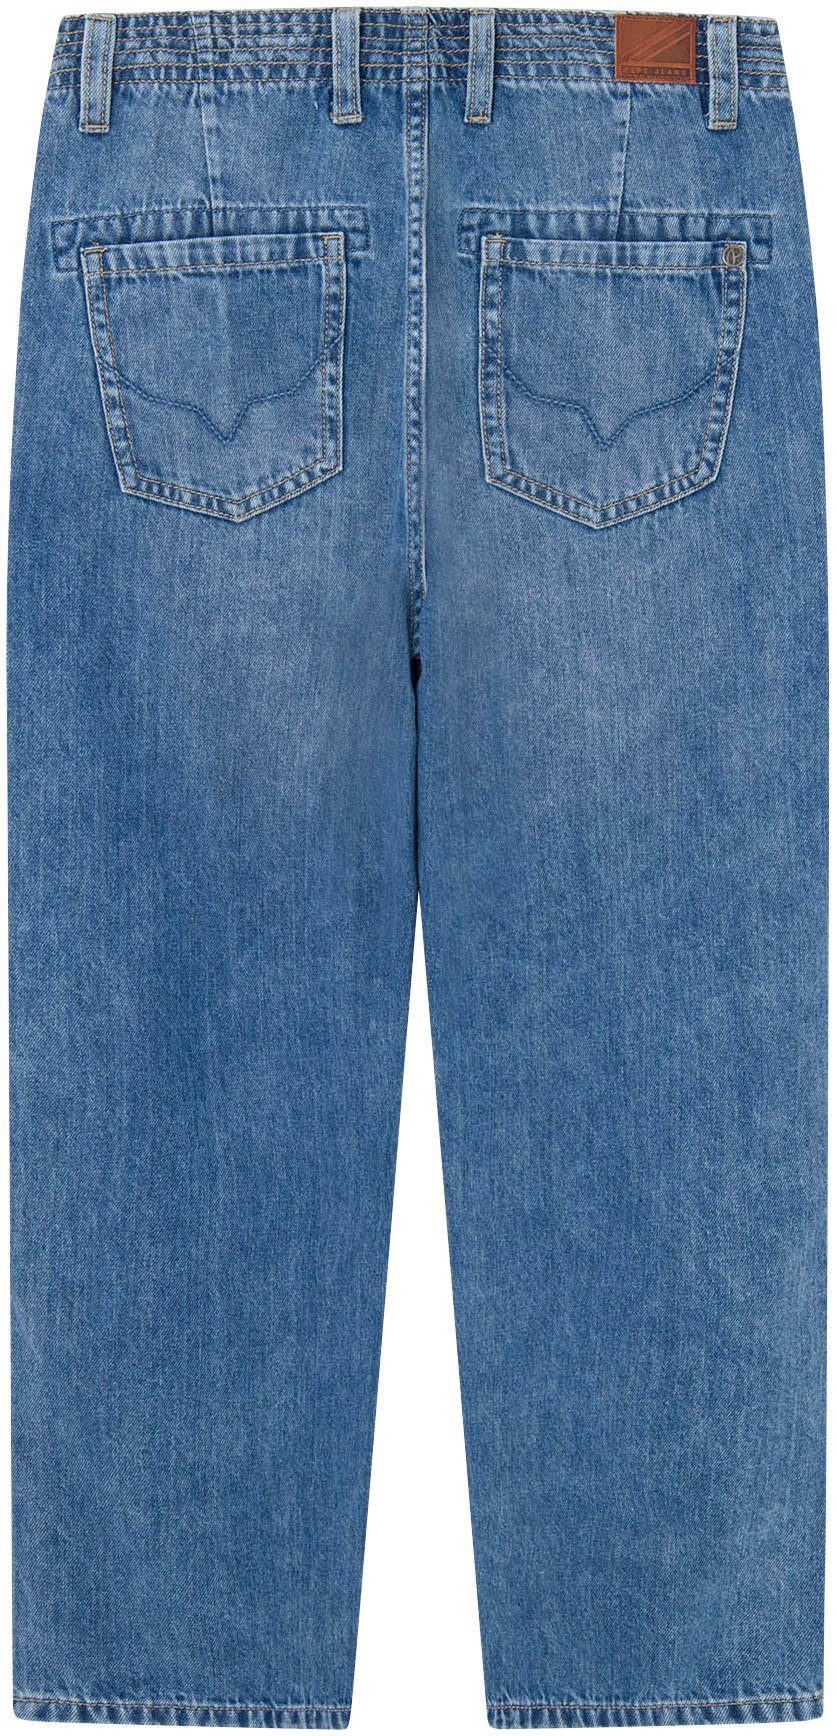 Pepe Jeans Loose fit jeans